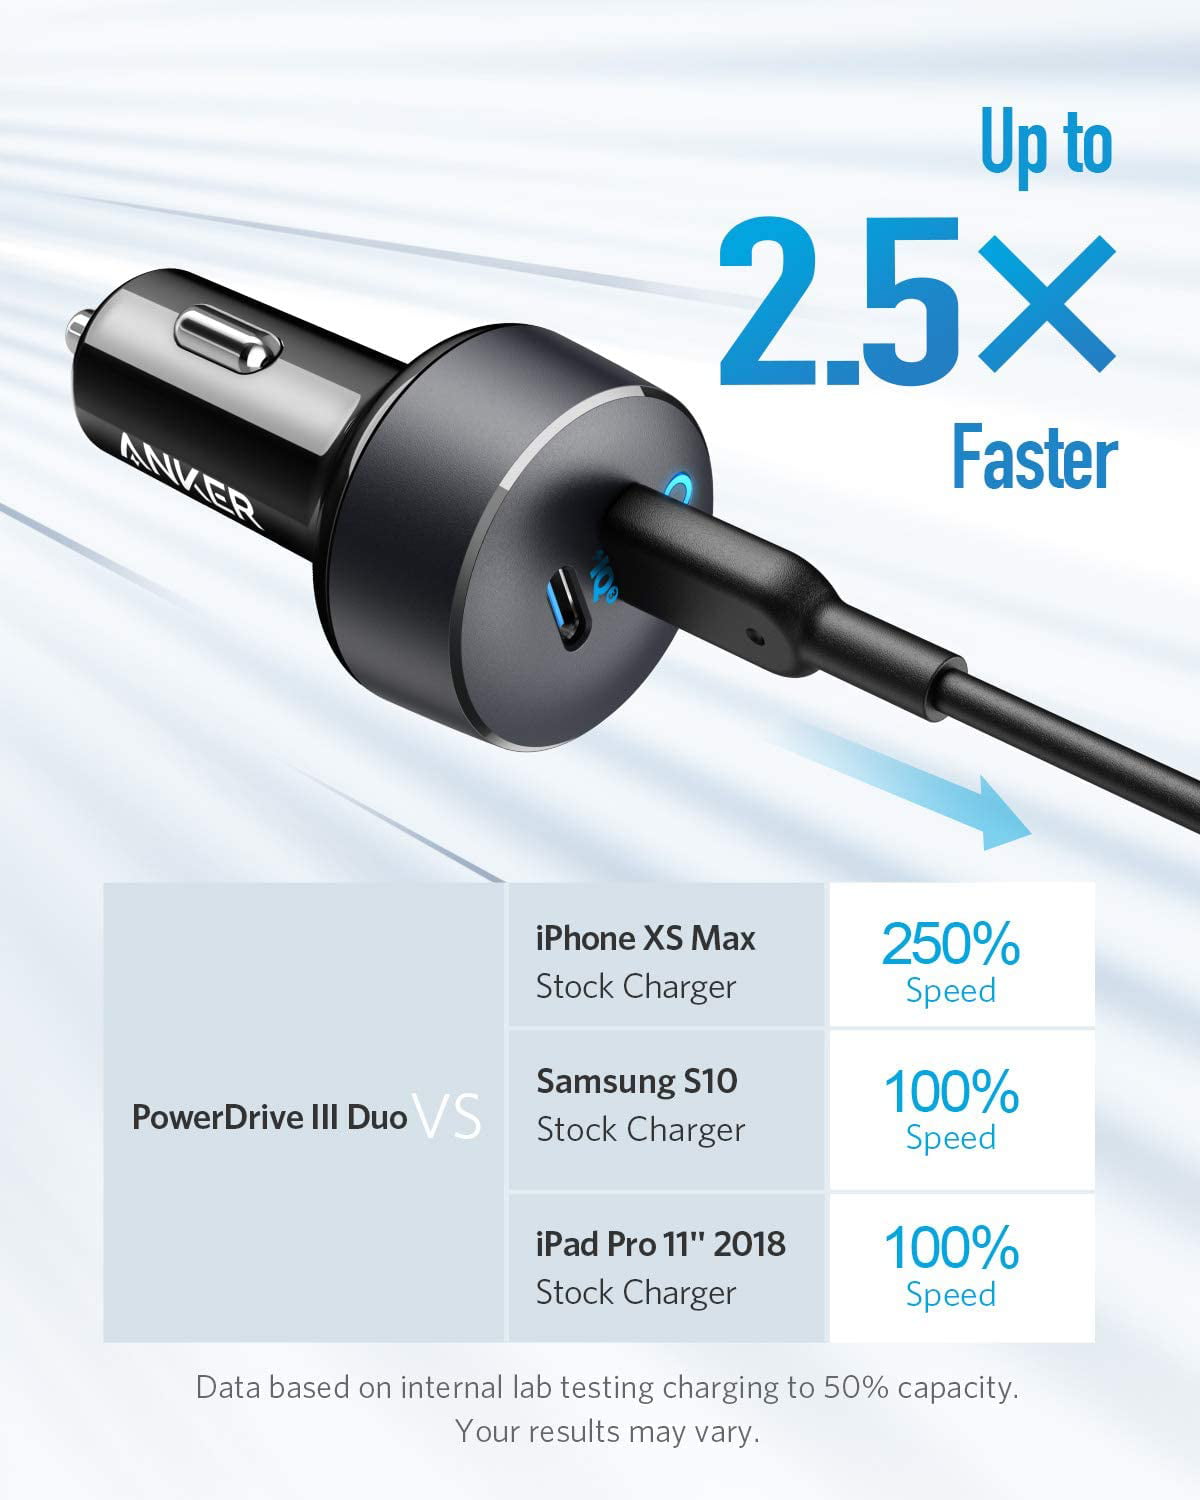 and More 36W Metal Dual USB Car Charger Adapter Anker Car Charger iPad Pro iPhone 11/11 Pro/ 11 Pro Max/XR PowerDrive III 2-Port 36W Alloy for Galaxy S20/ S20+/ S10/ S10e/ S10+